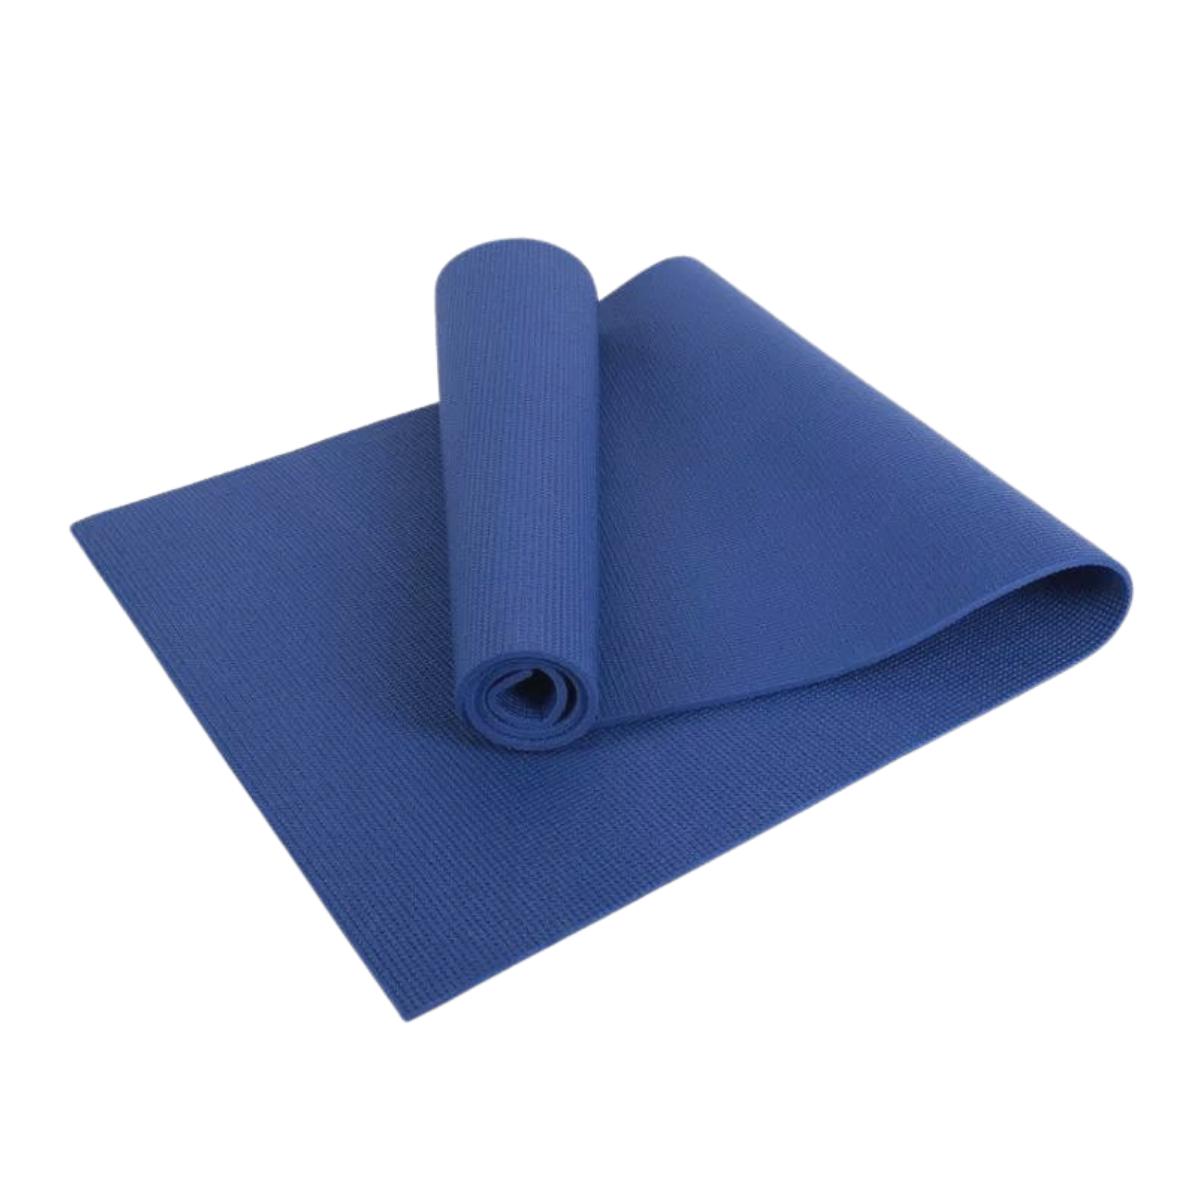 Performance Yoga Mat With Carrying Straps - Purple